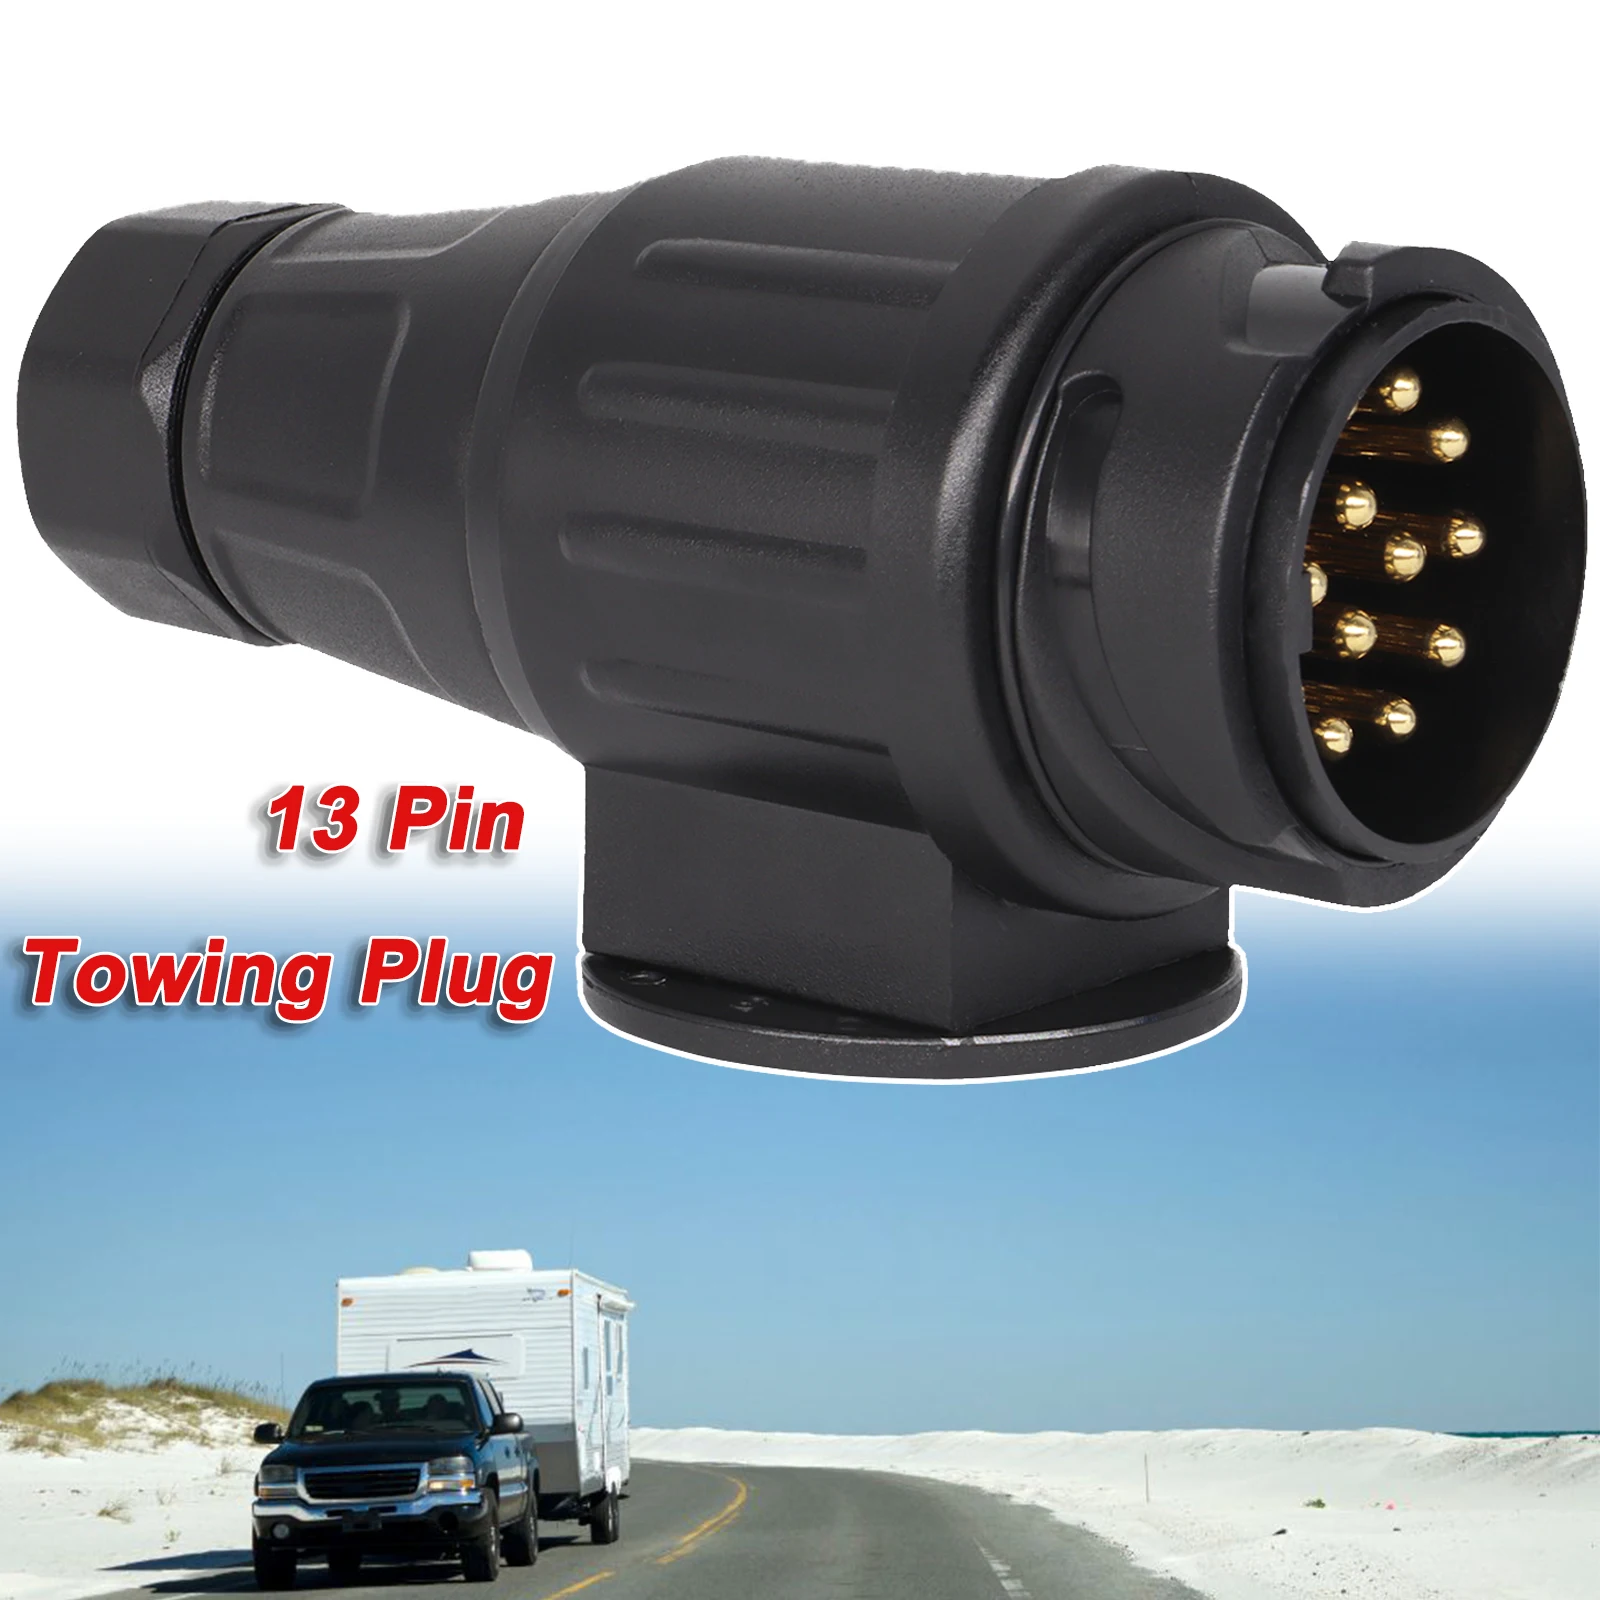 12V 13 Pin Trailer Plug Durable 13 Pole Electrical Caravan Wiring Connector Towing Bar Socket Adapter Car Truck RV Accessories 1 pc durable headphone jack connector 3 5mm jack plug audio adapter durable single track wire connector